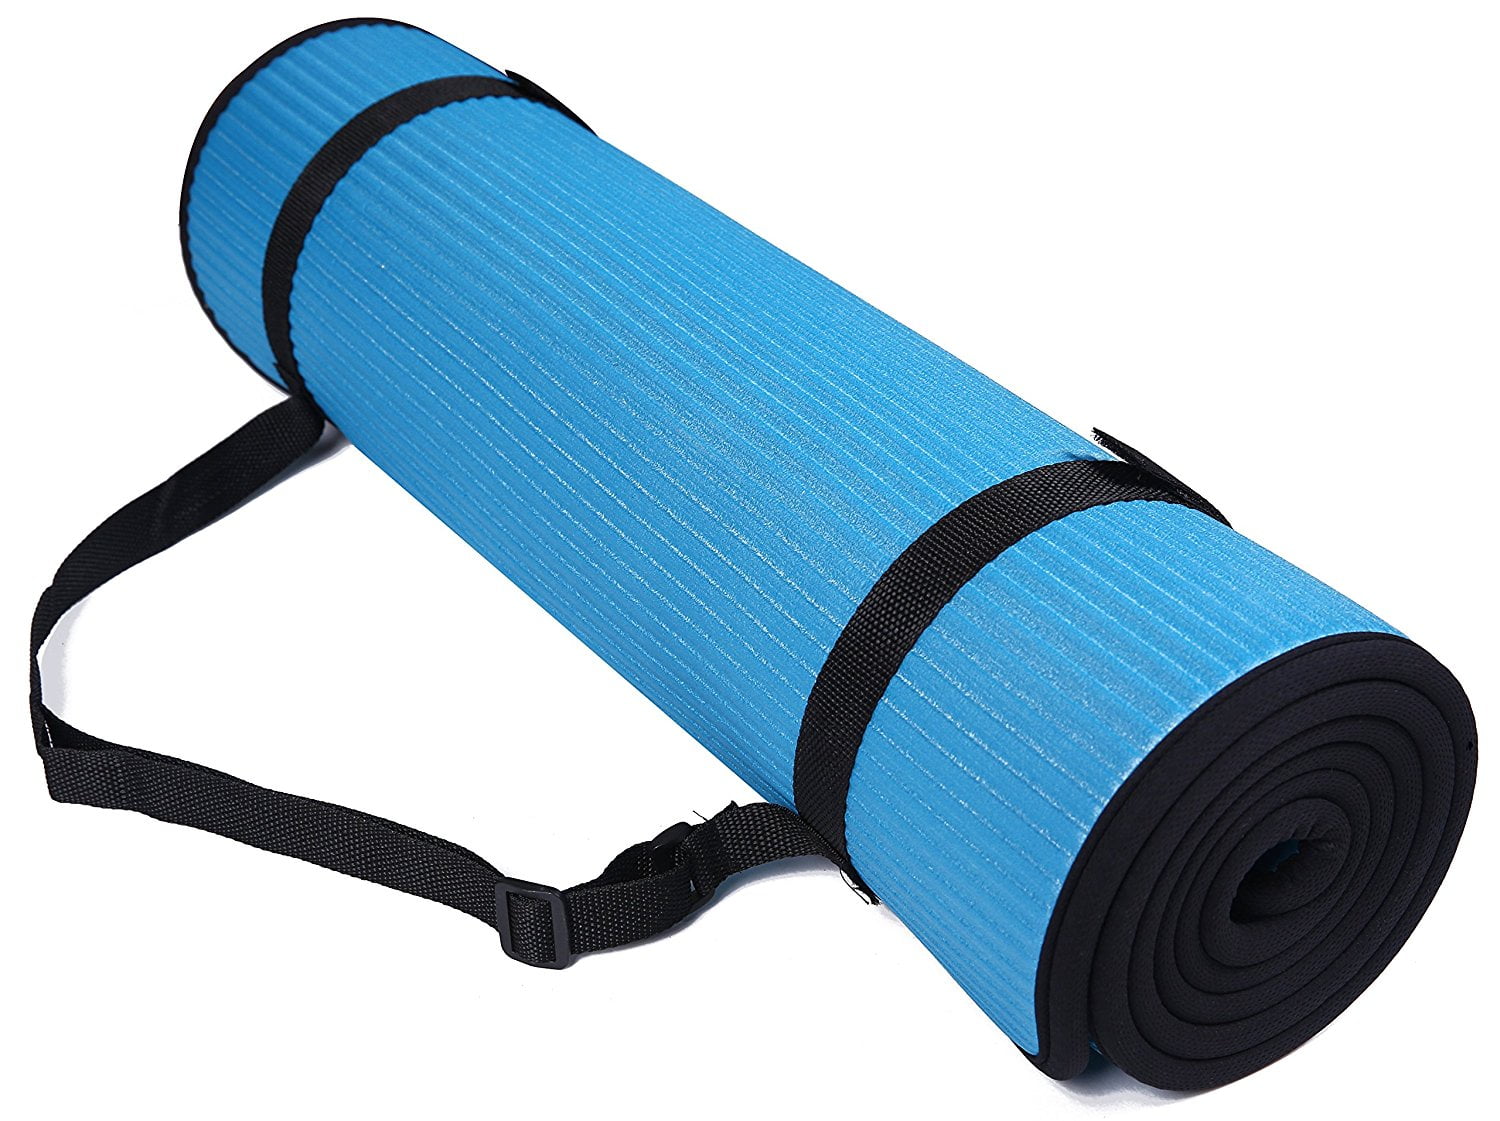 Extra Thick Non-slip Yoga Mat Pad Exercise Fitness Pilates w/ Strap Fast Free US 